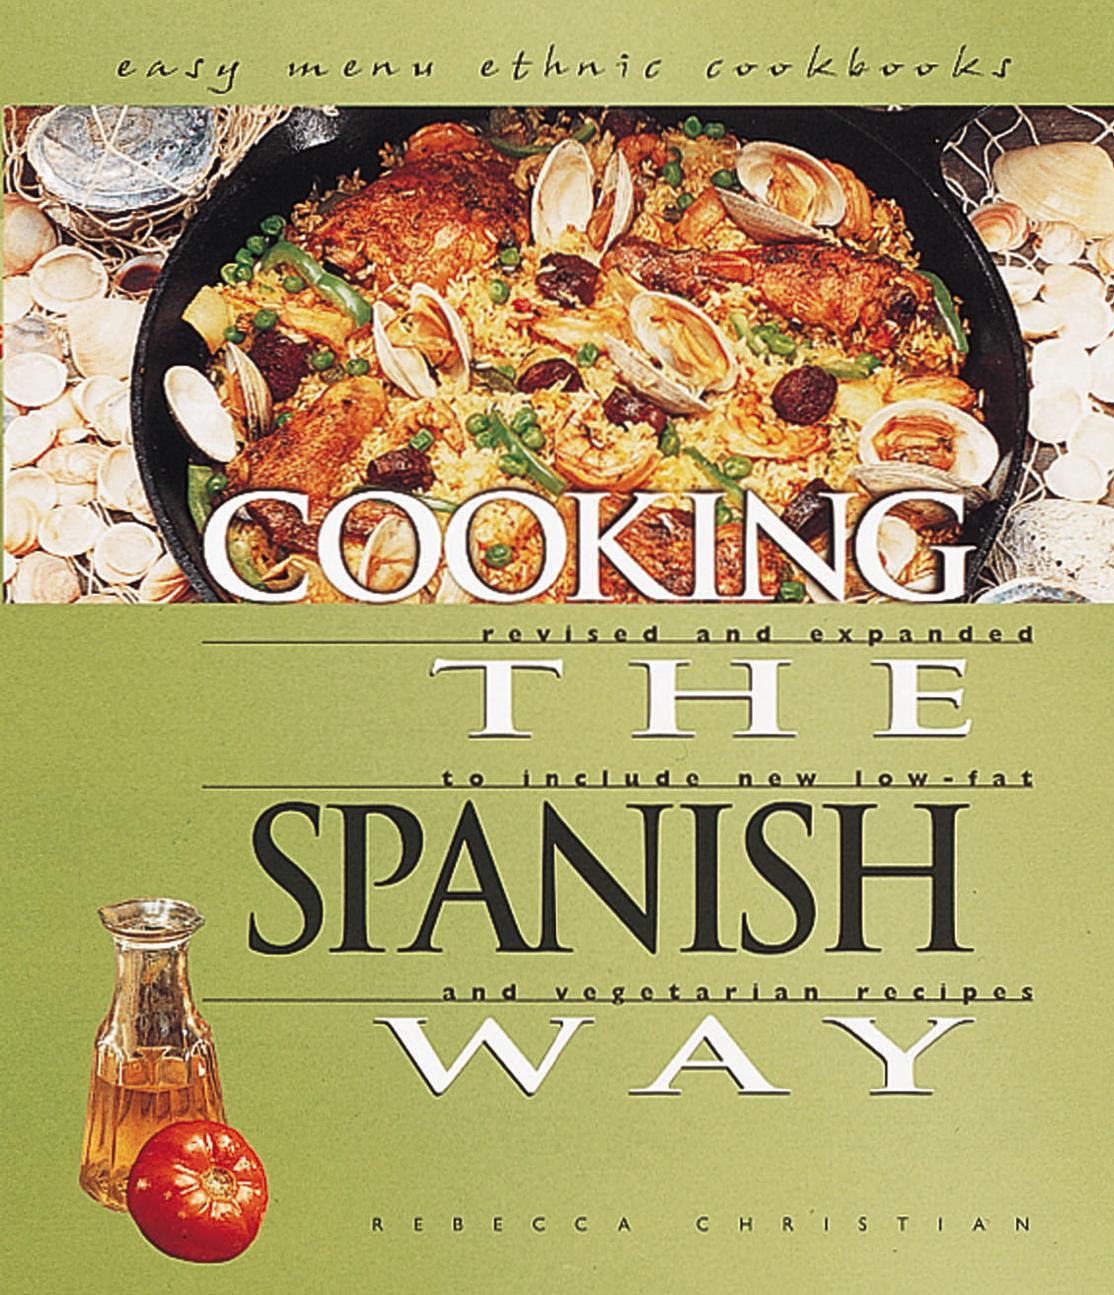 Cooking the Spanish Way by Rebecca Christian